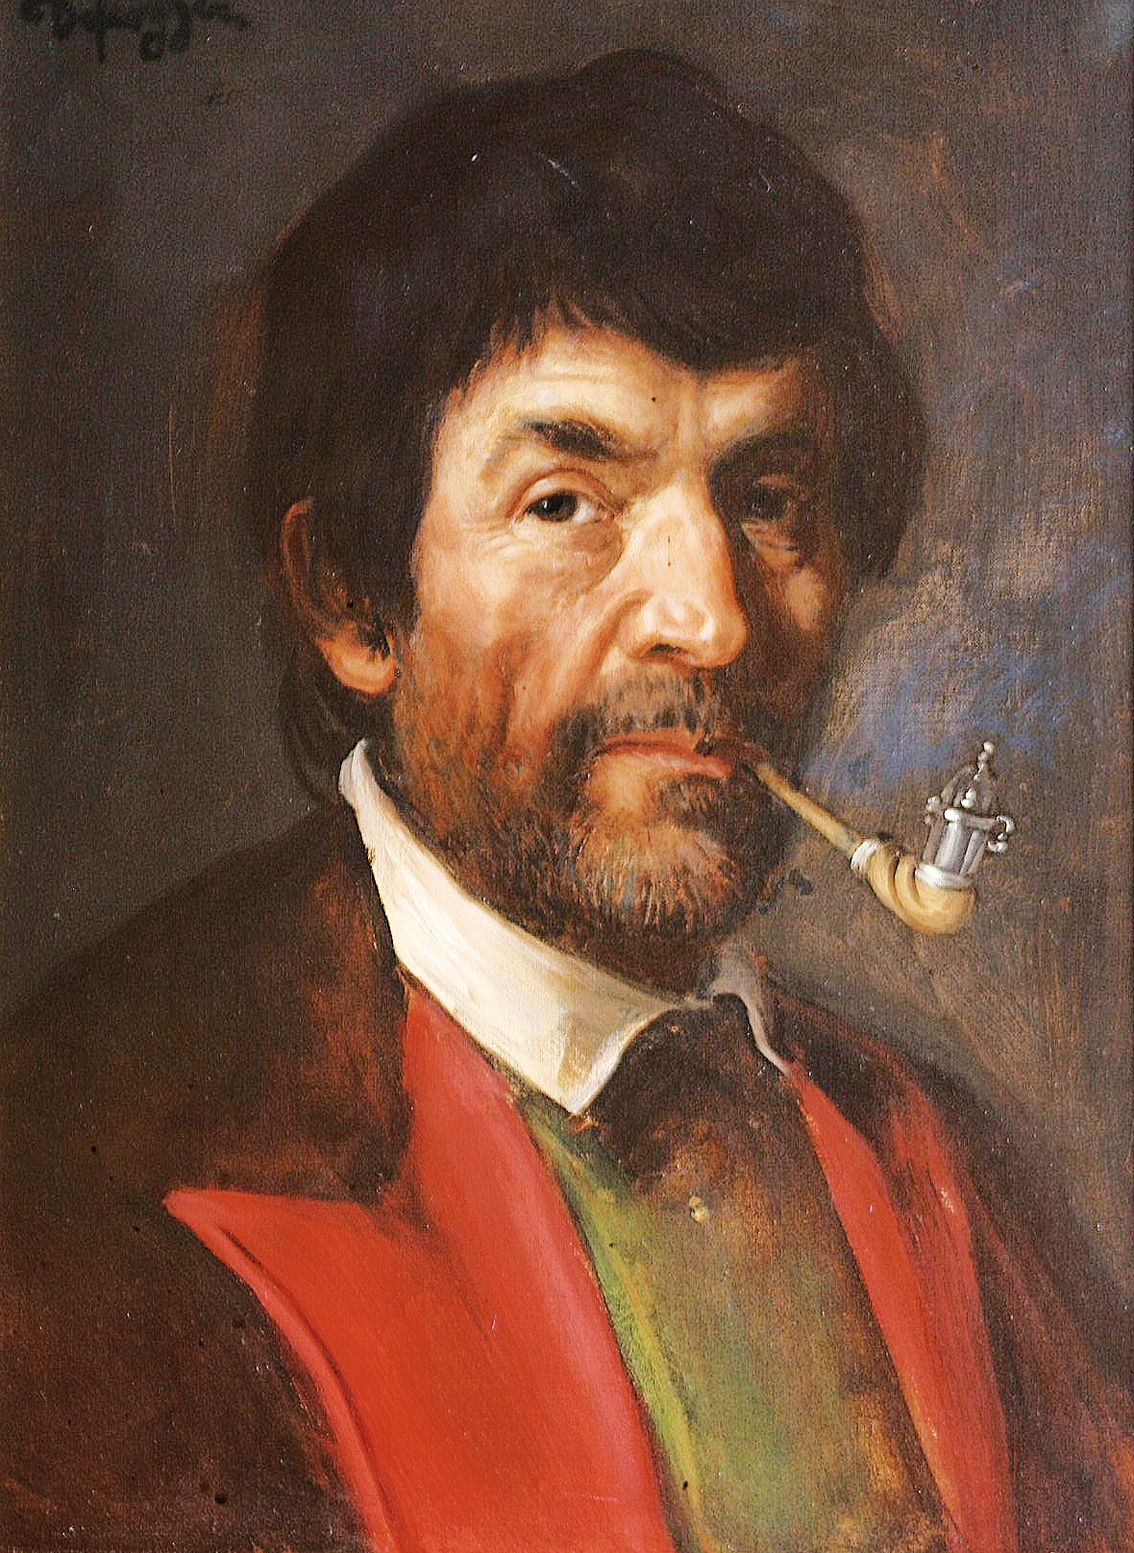 A portrait of a man with a pipe